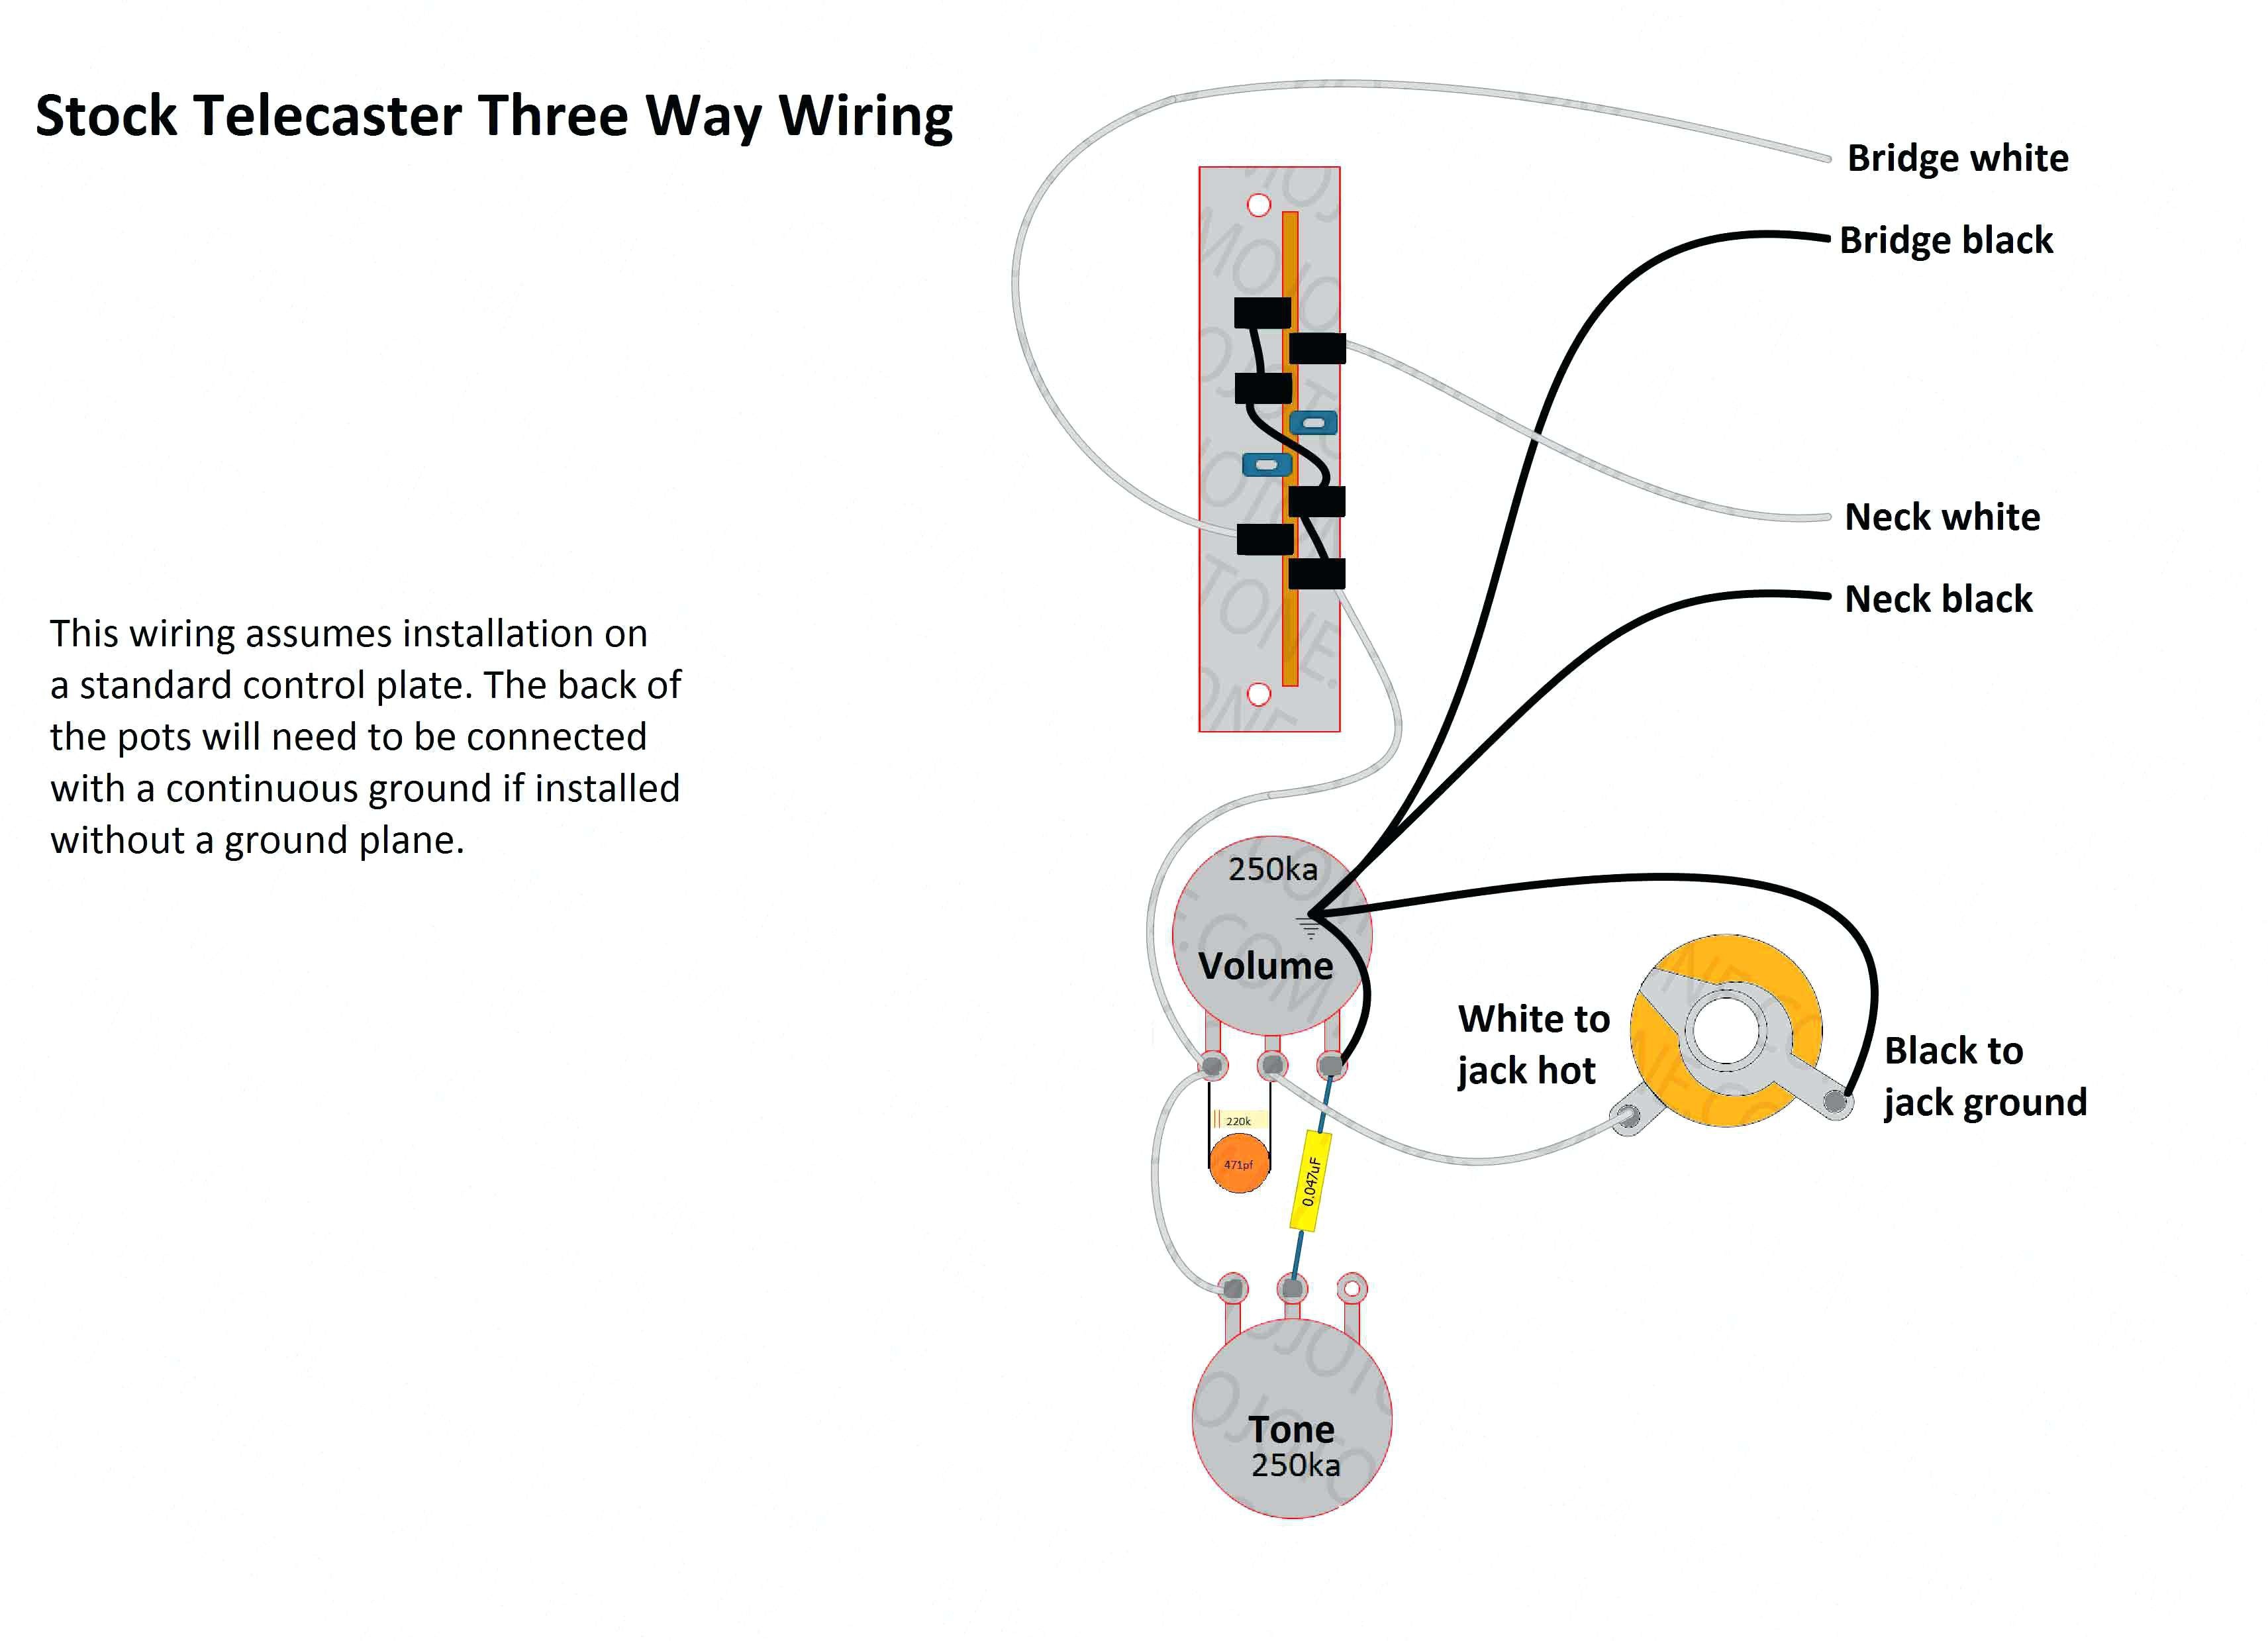 3 Way Wiring Diagrams Lovely 3 Way Wire Diagram Alternator Wiring ford for Pickup Telecaster